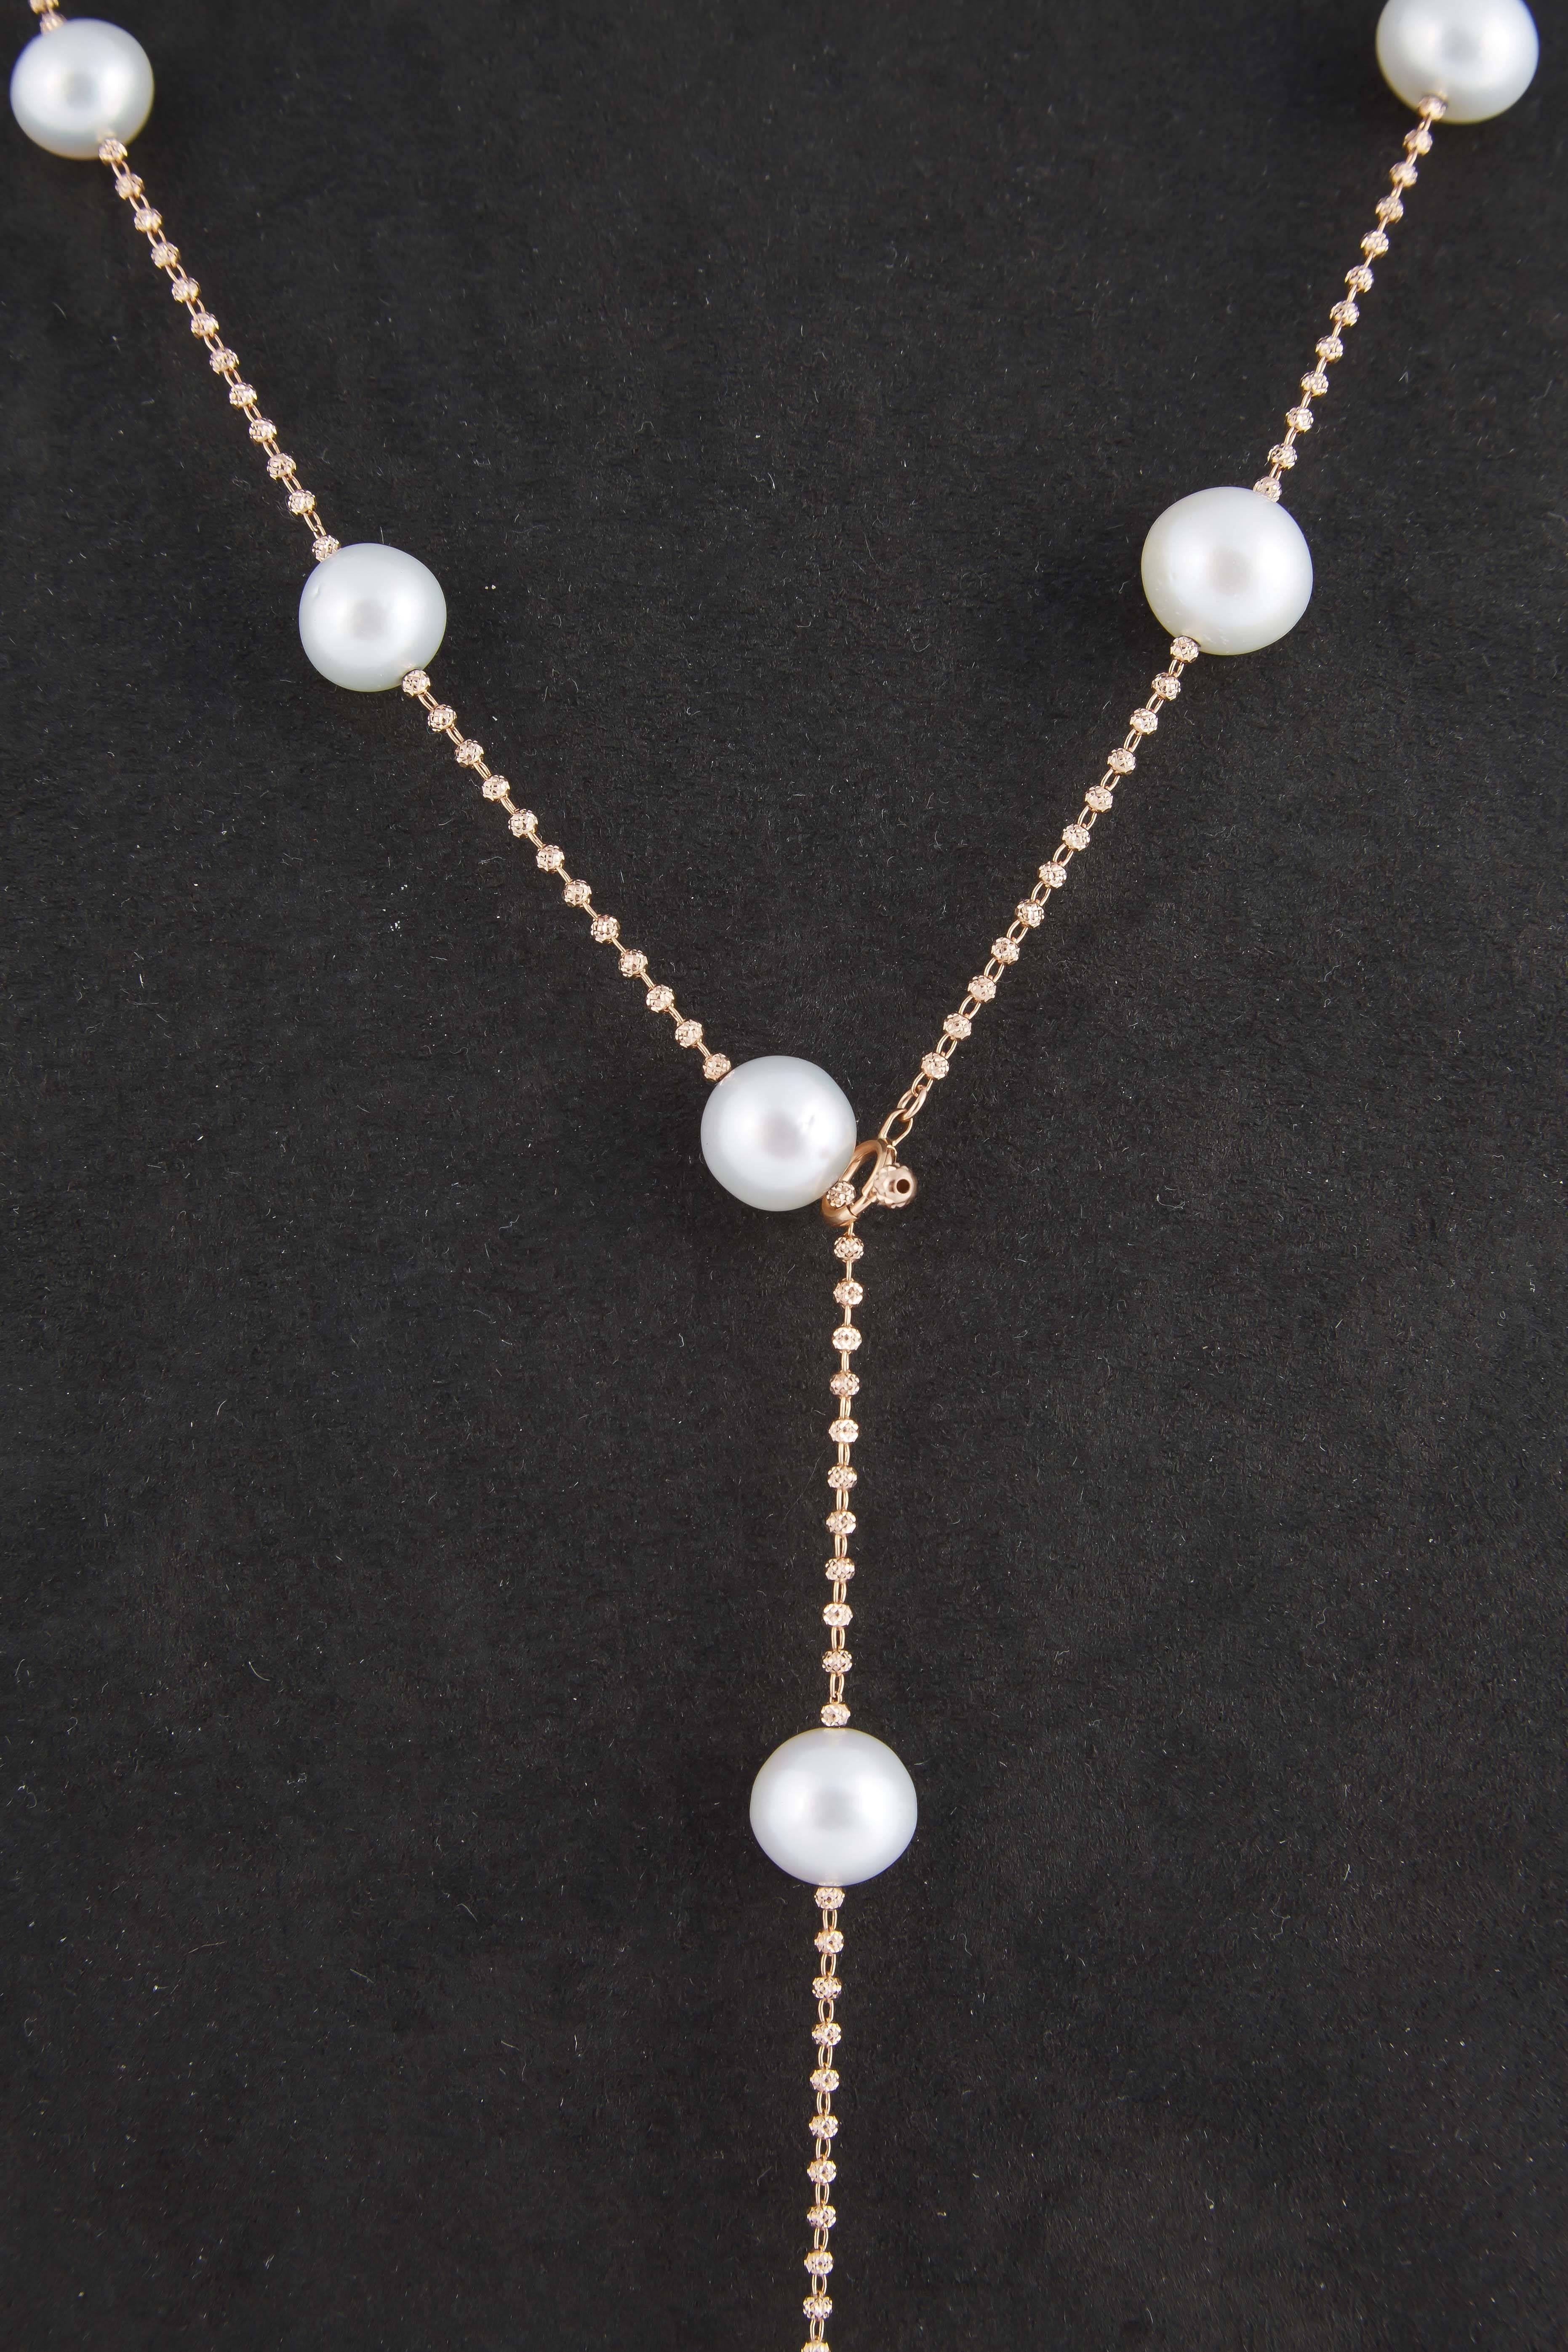 White South Sea Pearl: 10-12 mm
Material: 18 K Yellow Gold
Length: 32